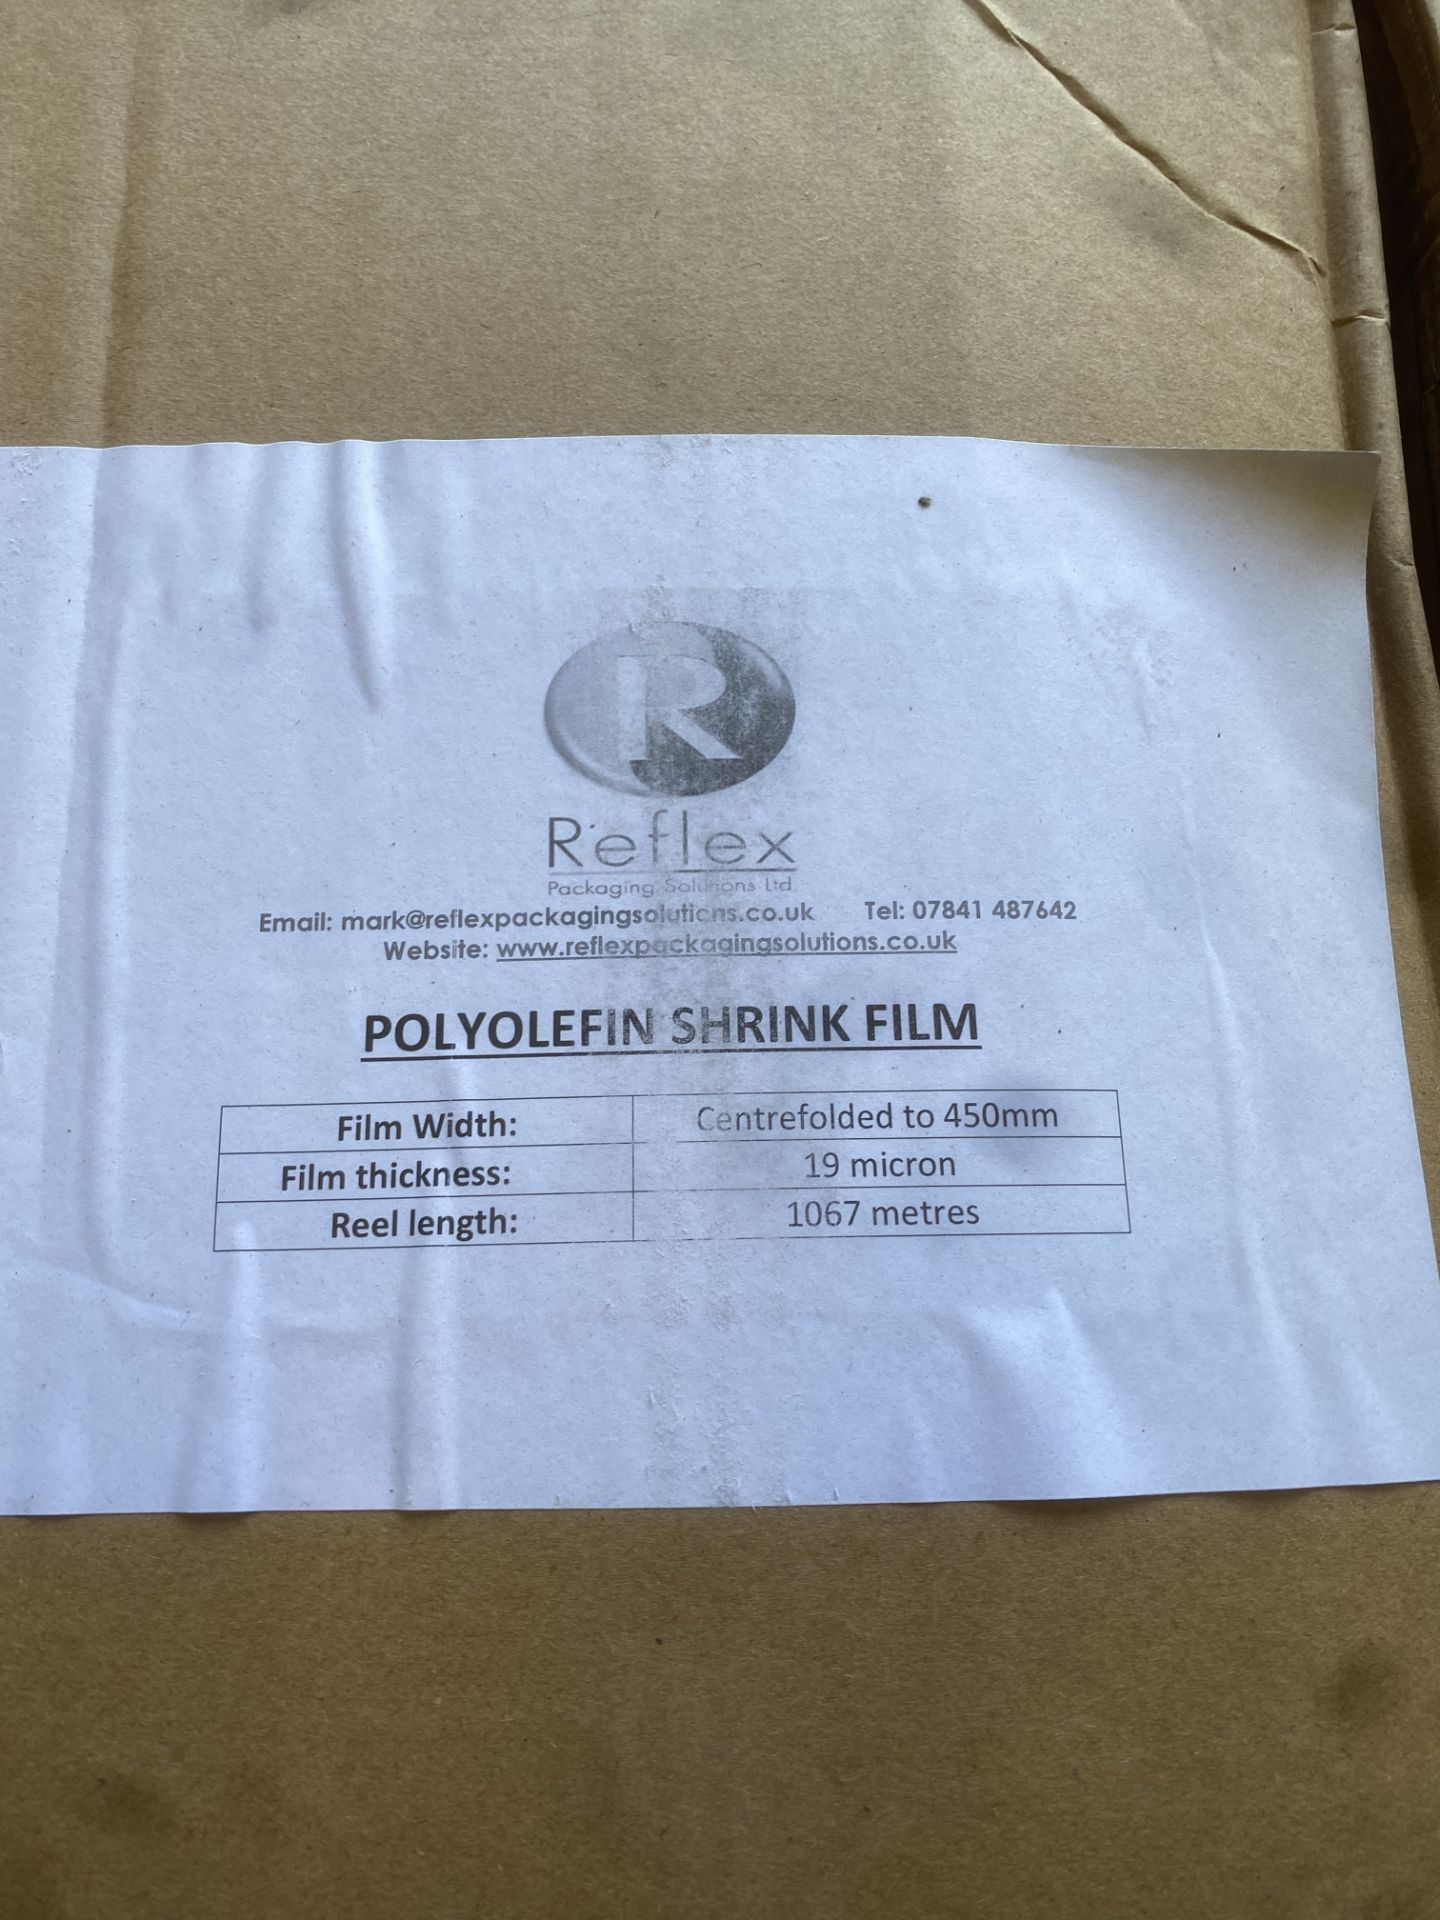 24 X ROLLS OF 450MM POLYOLEFIN SHRINK FILM RRP£2640 - Image 3 of 3